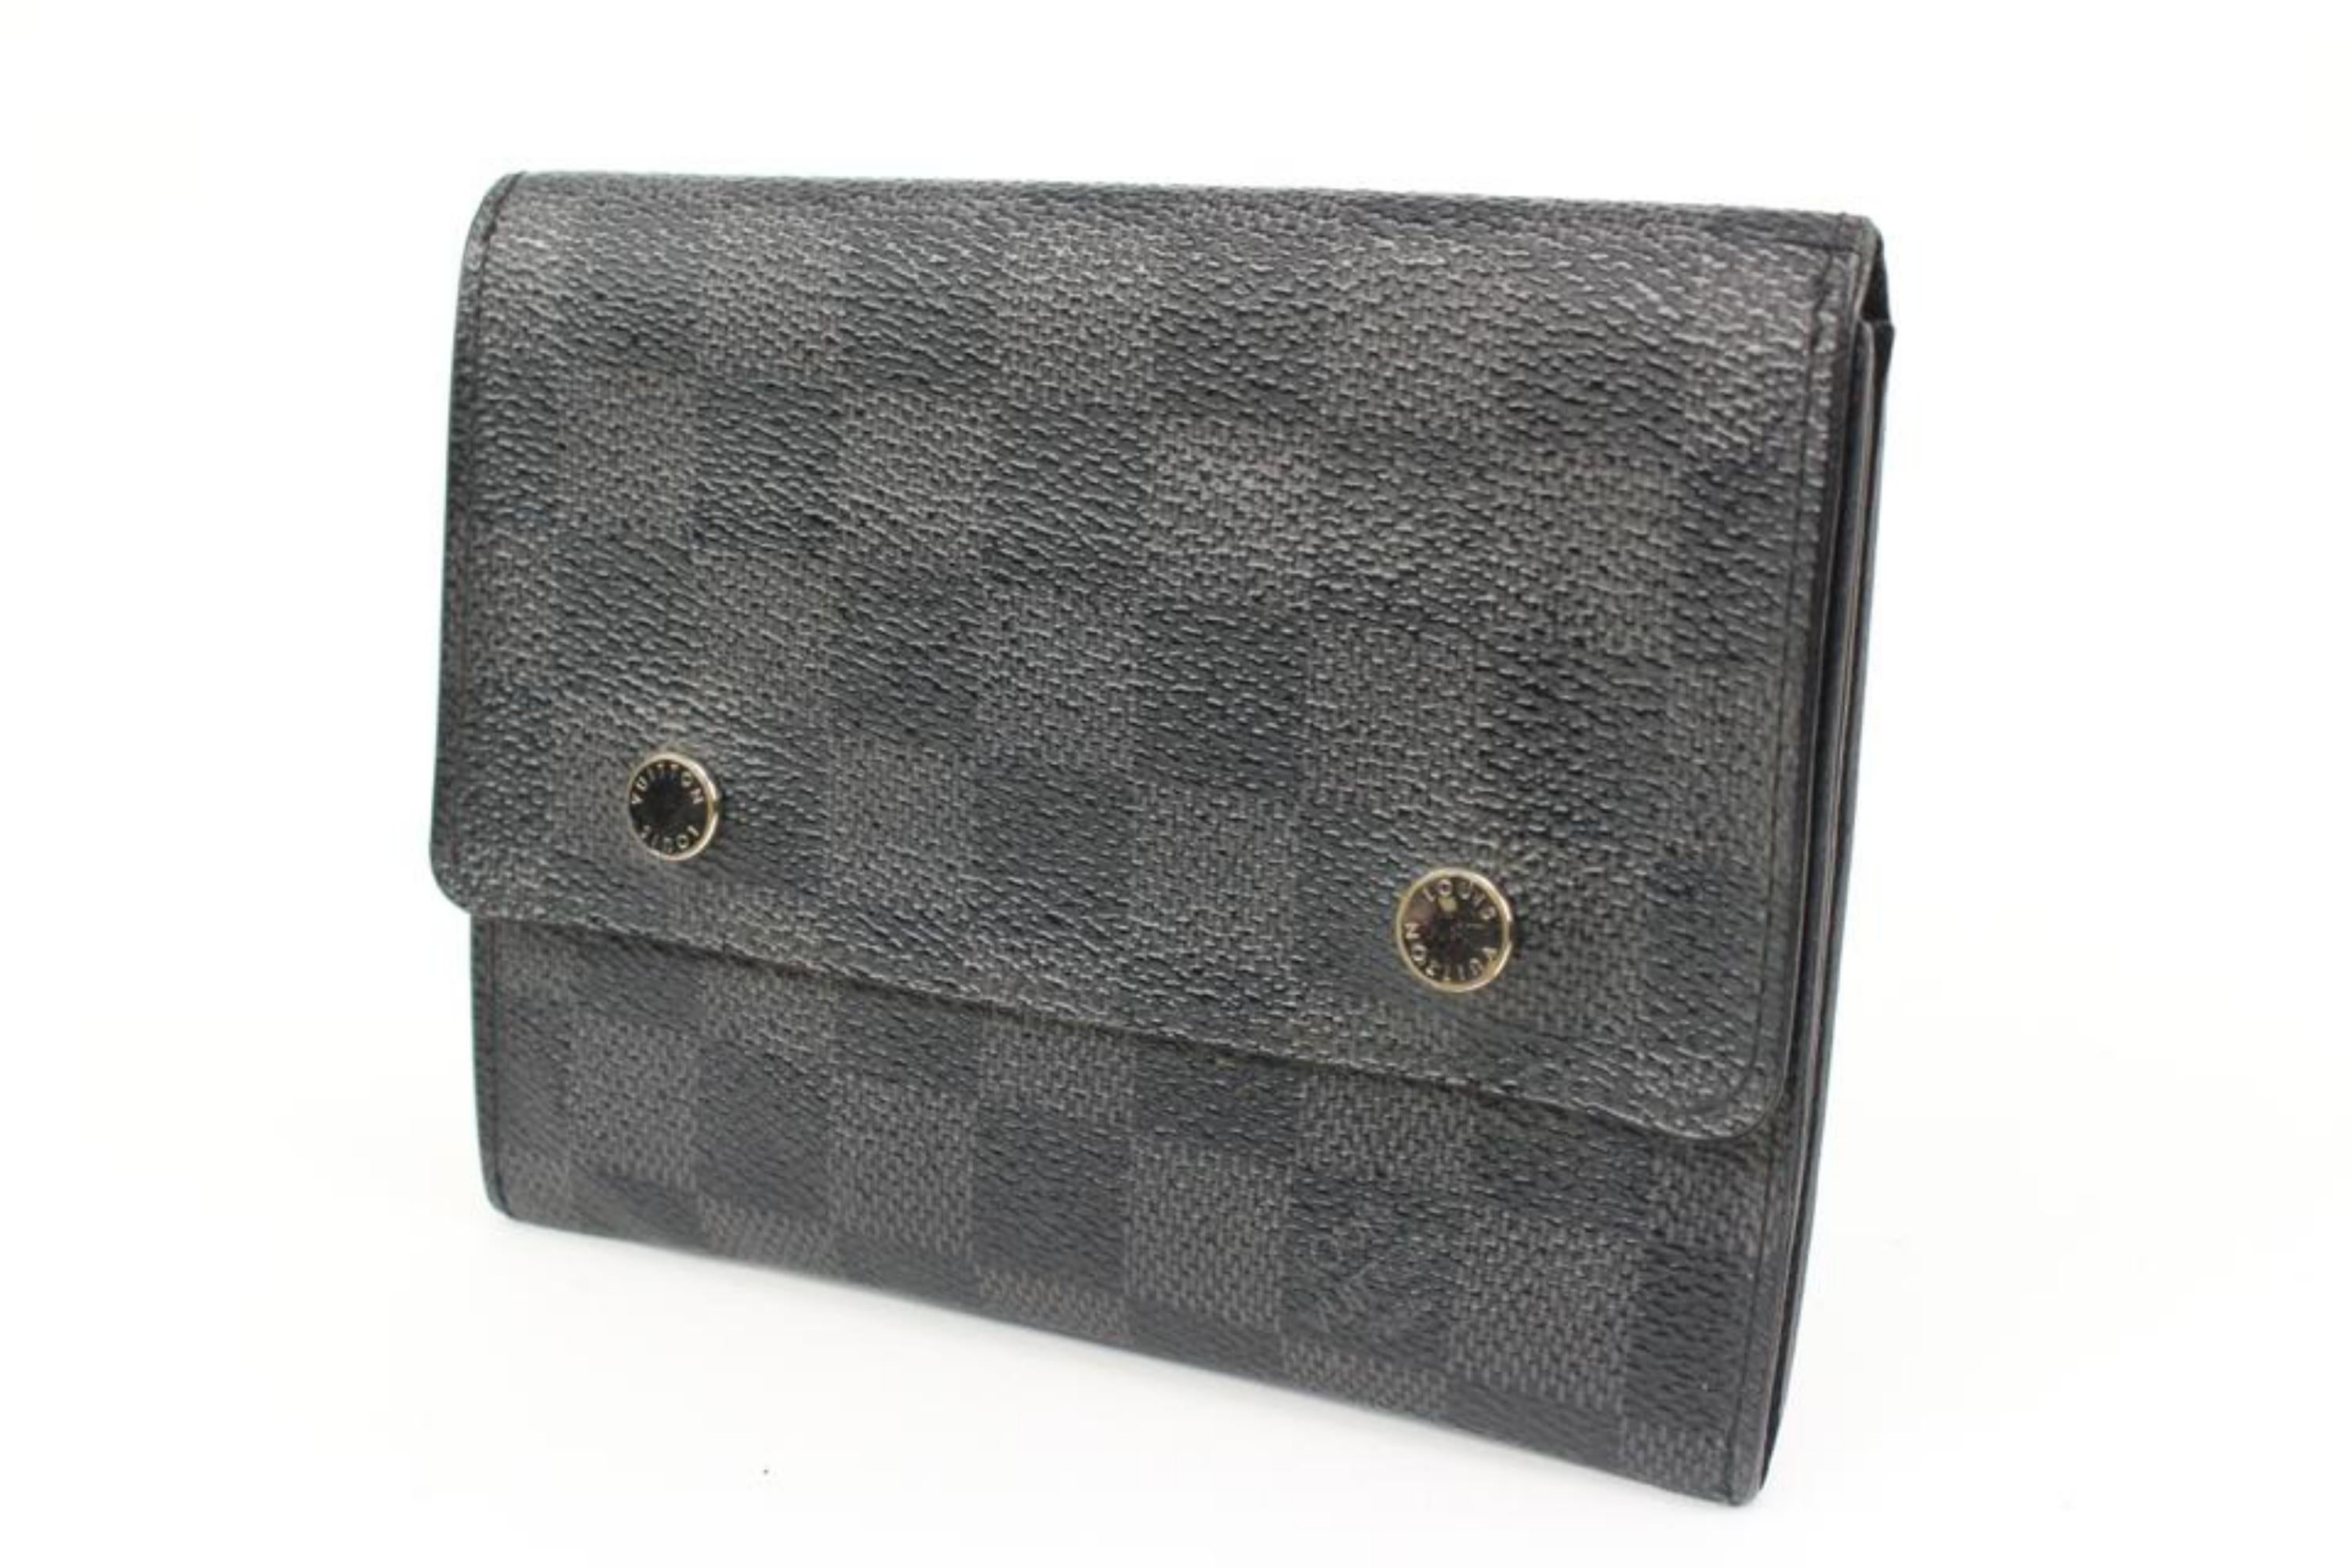 Louis Vuitton Damier Graphite Modulable Compact Snap Wallet 26lk413s
Date Code/Serial Number: MI2181
Made In: France
Measurements: Length:  5.5